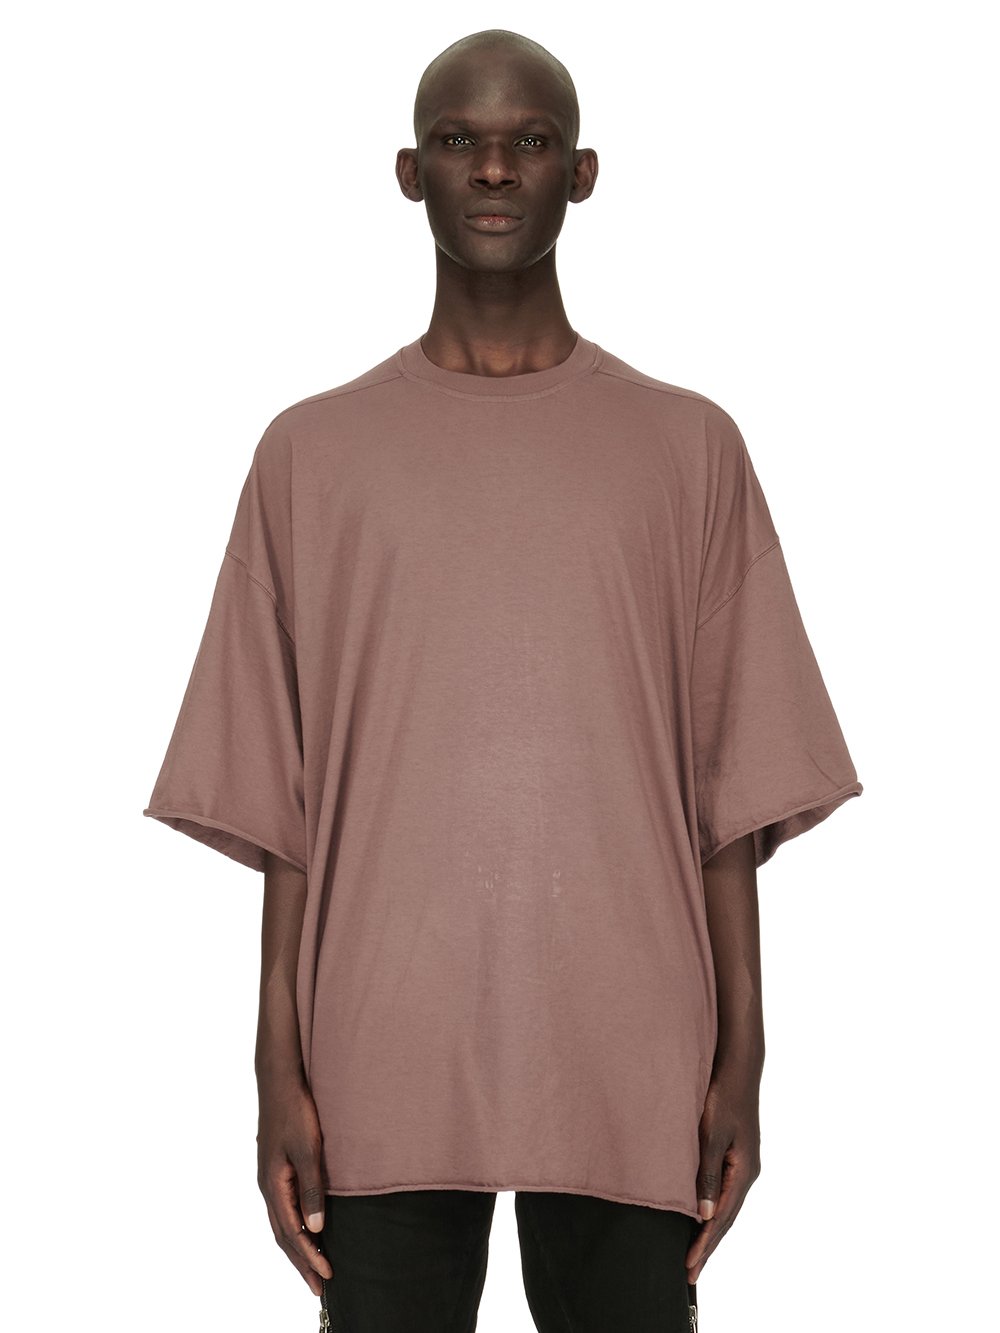 DRKSHDW FW23 LUXOR TOMMY T IN MAUVE MEDIUM WEIGHT COTTON JERSEY